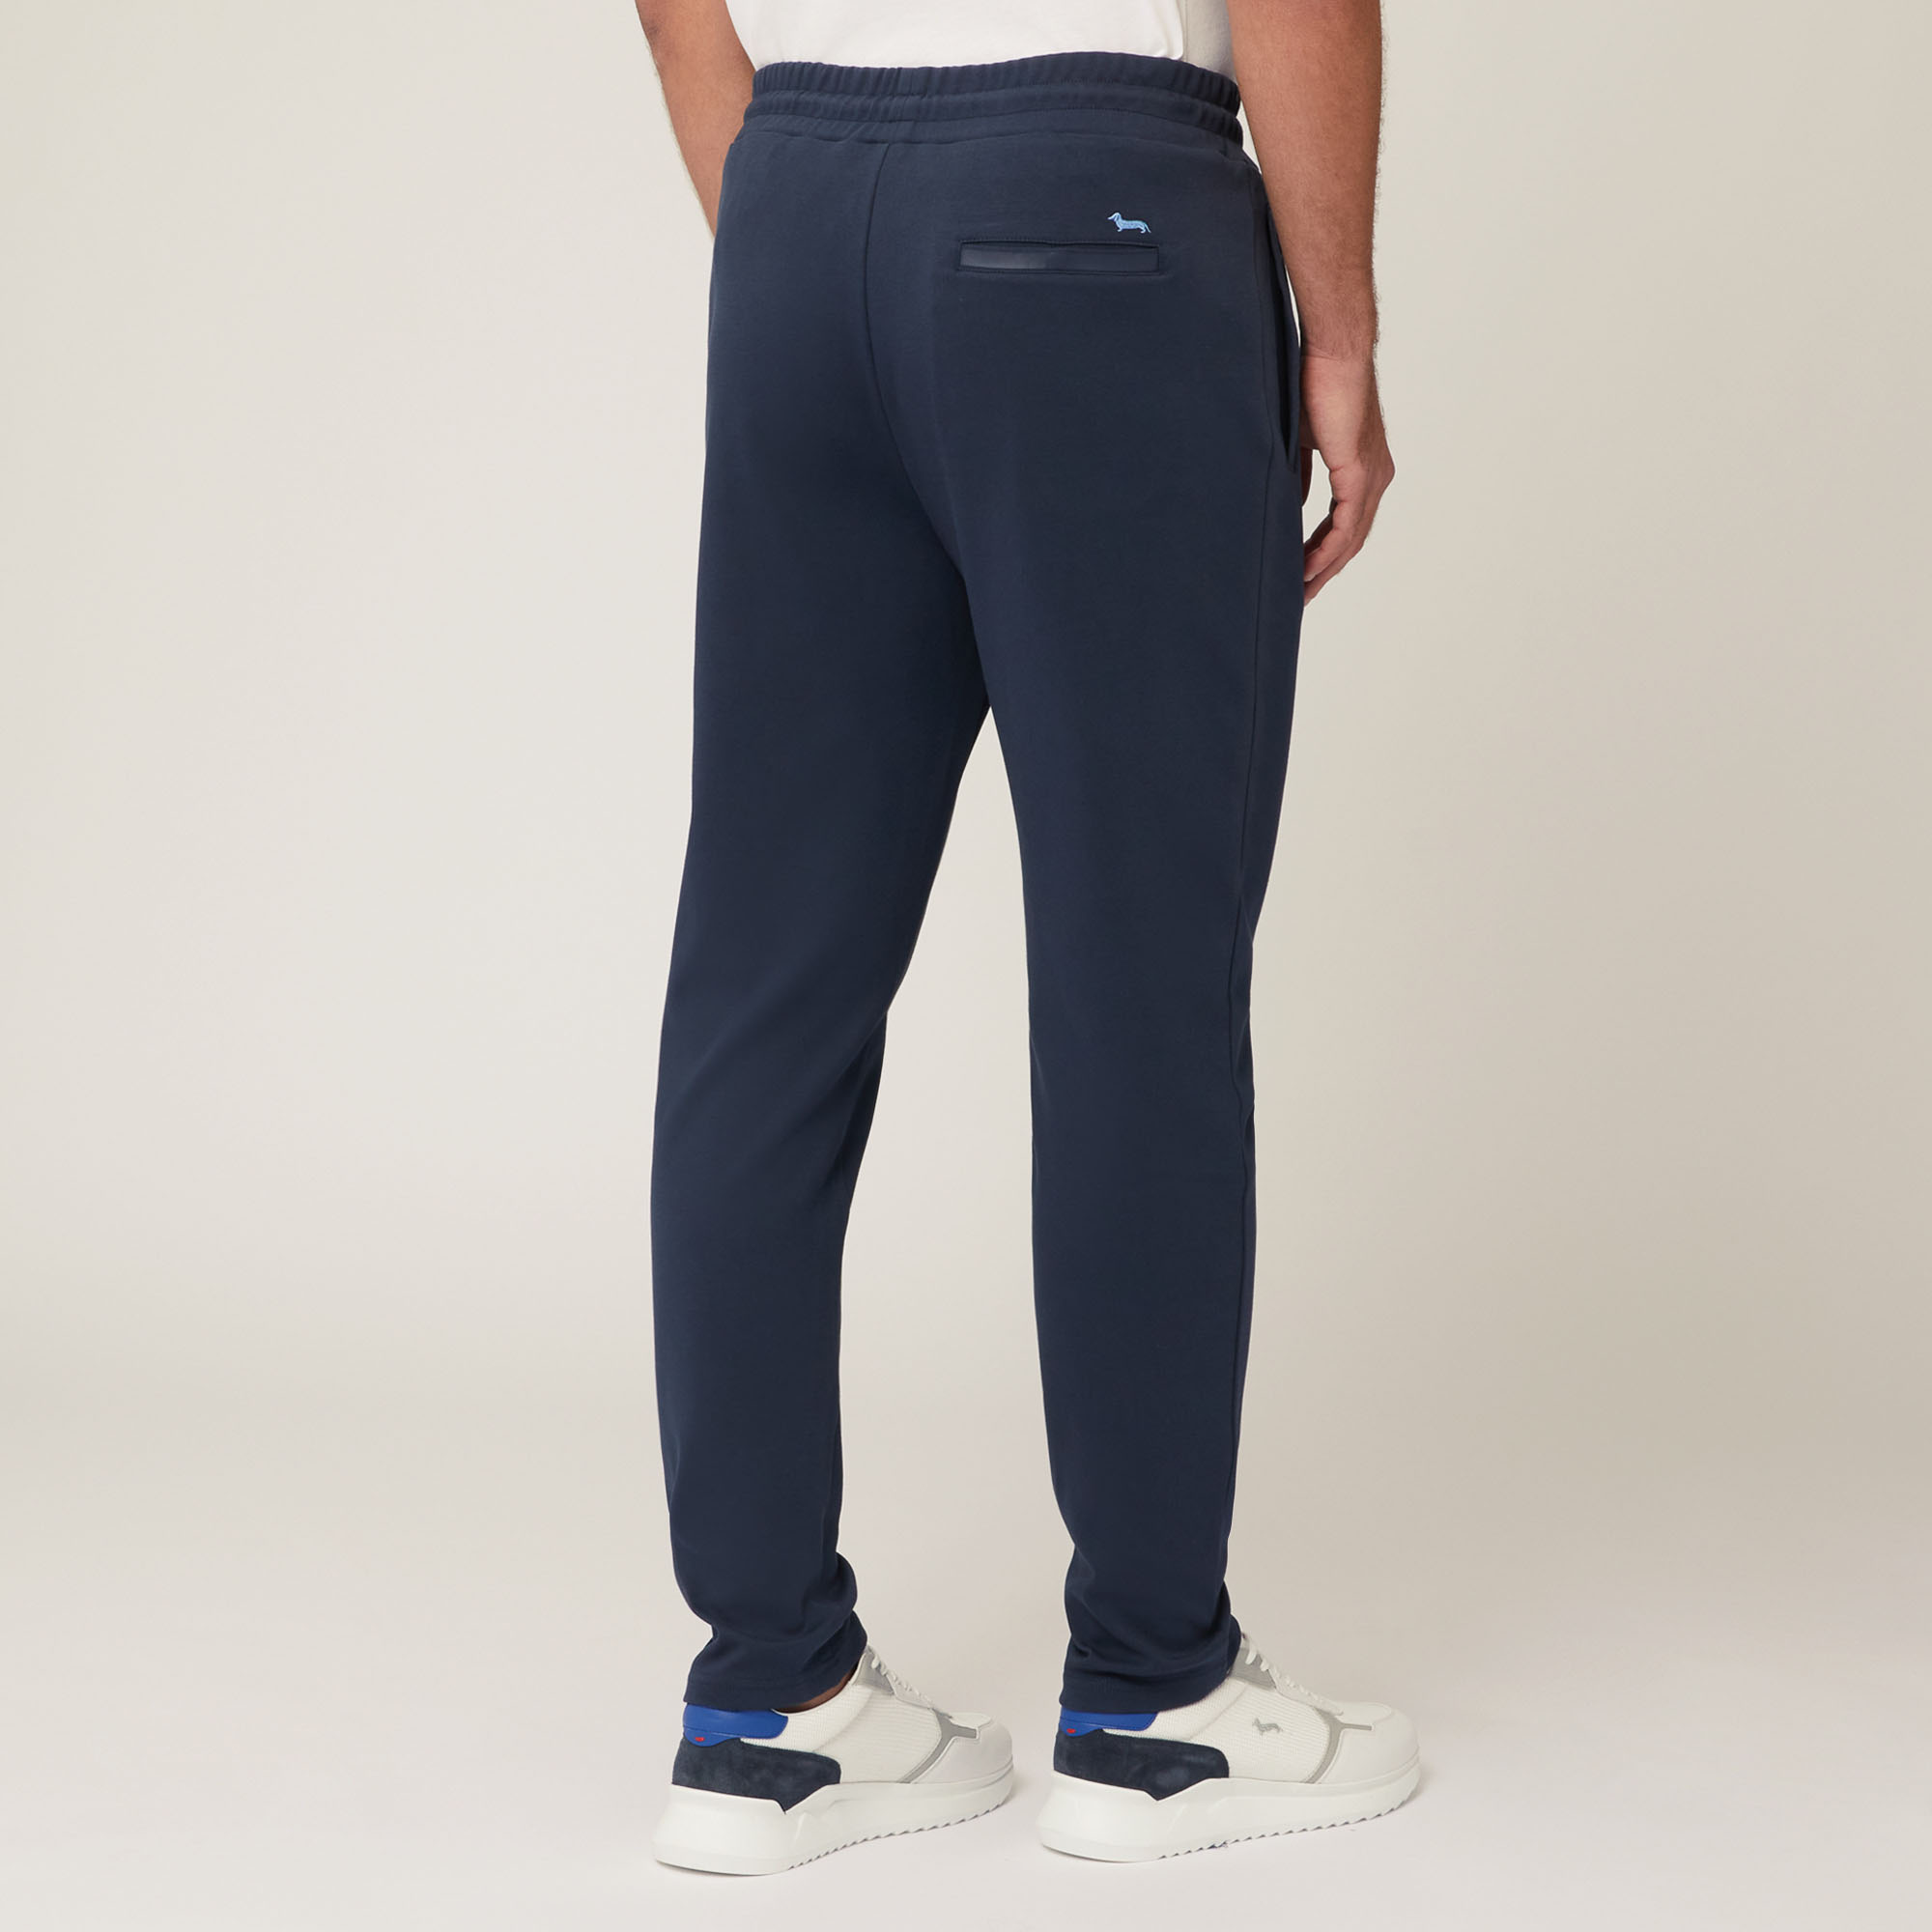 Pantaloni In Cotone Con Tasca Posteriore, Blu Navy, large image number 1